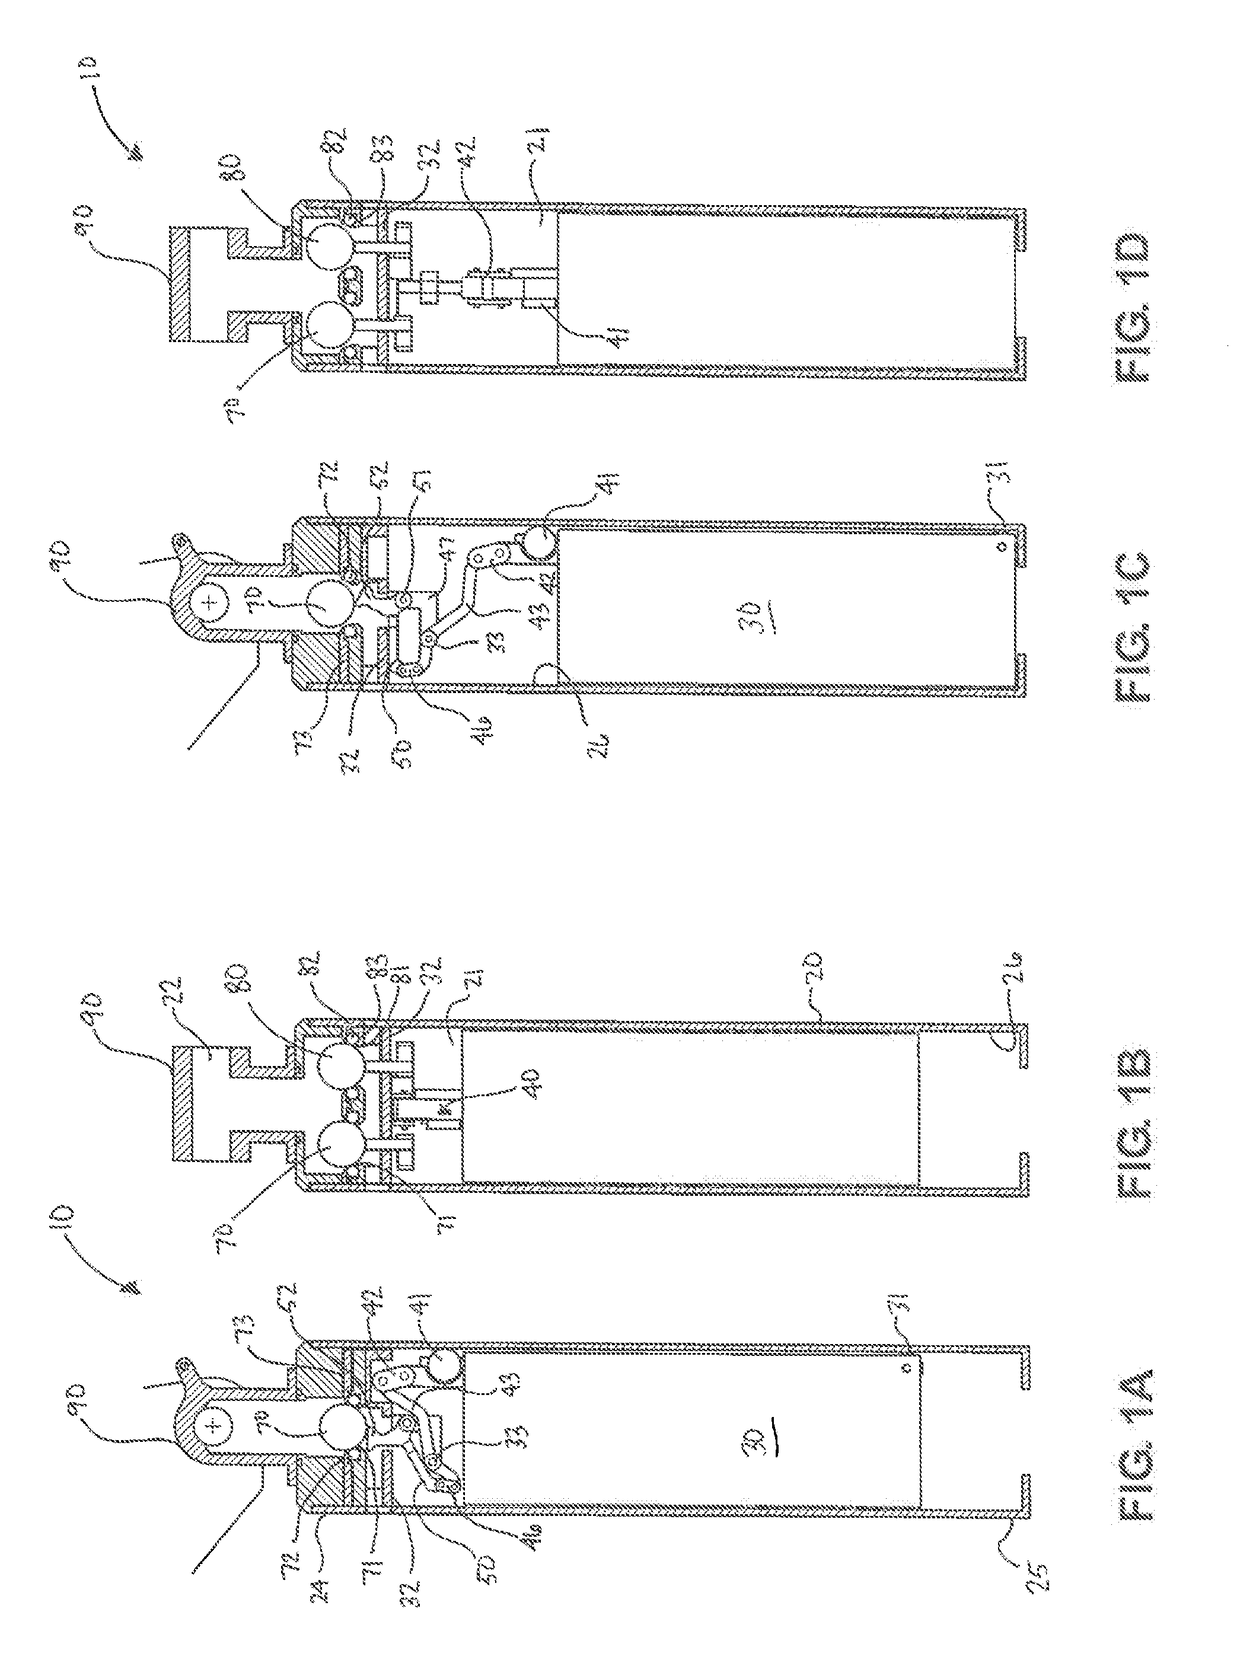 Method and Apparatus for Multi-Line Fuel Delivery